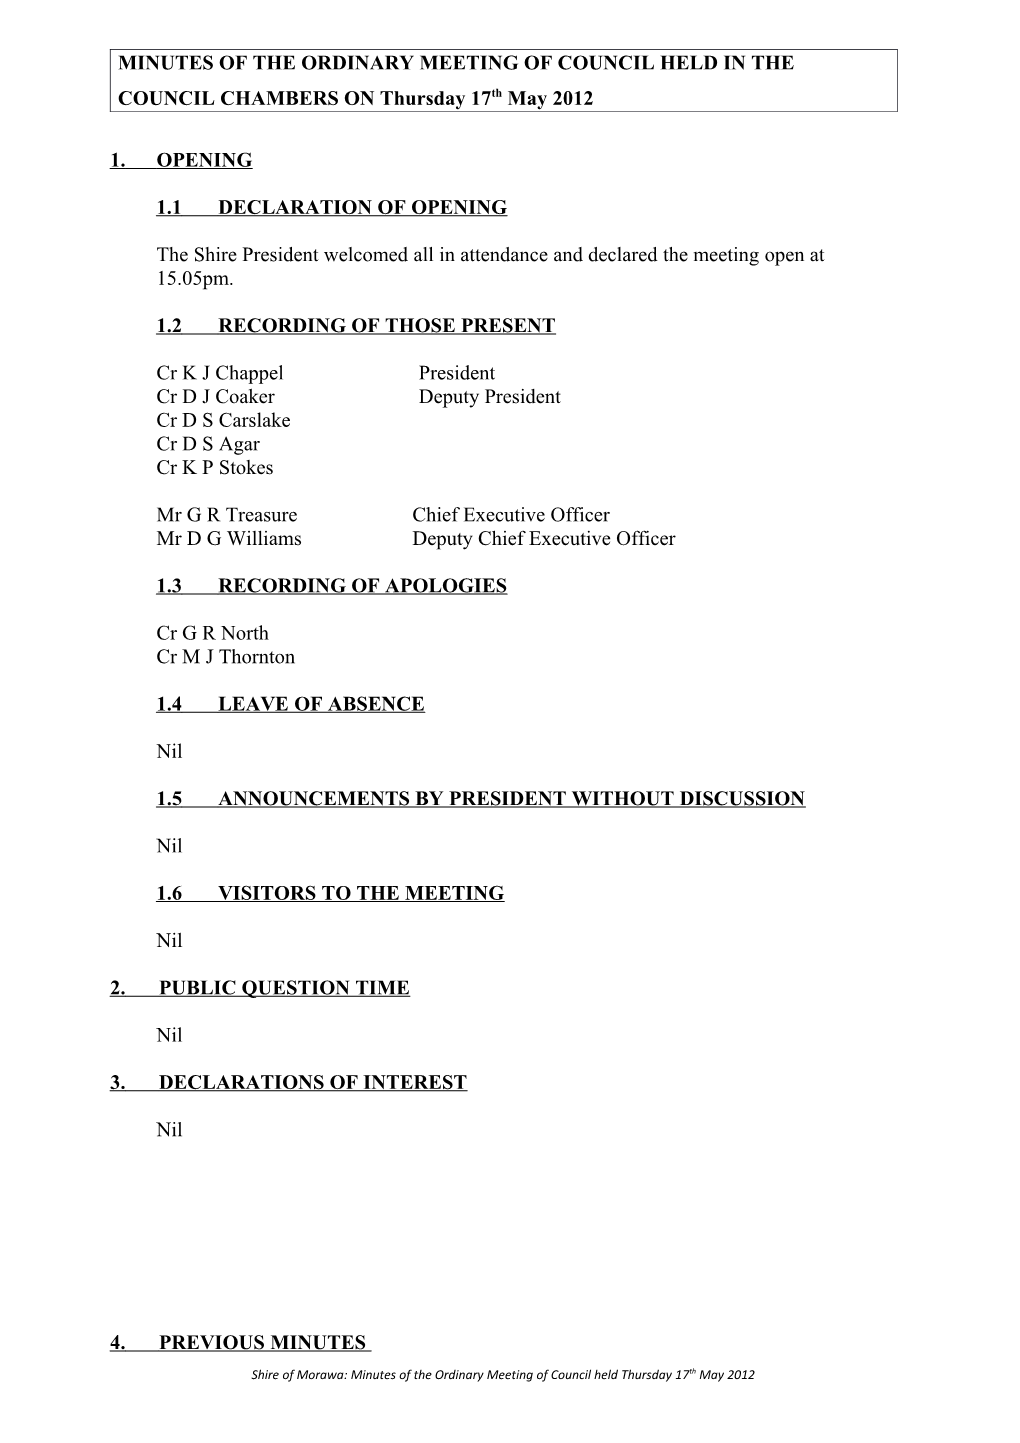 Minutes of the Ordinary Meeting of Council Held in The s1